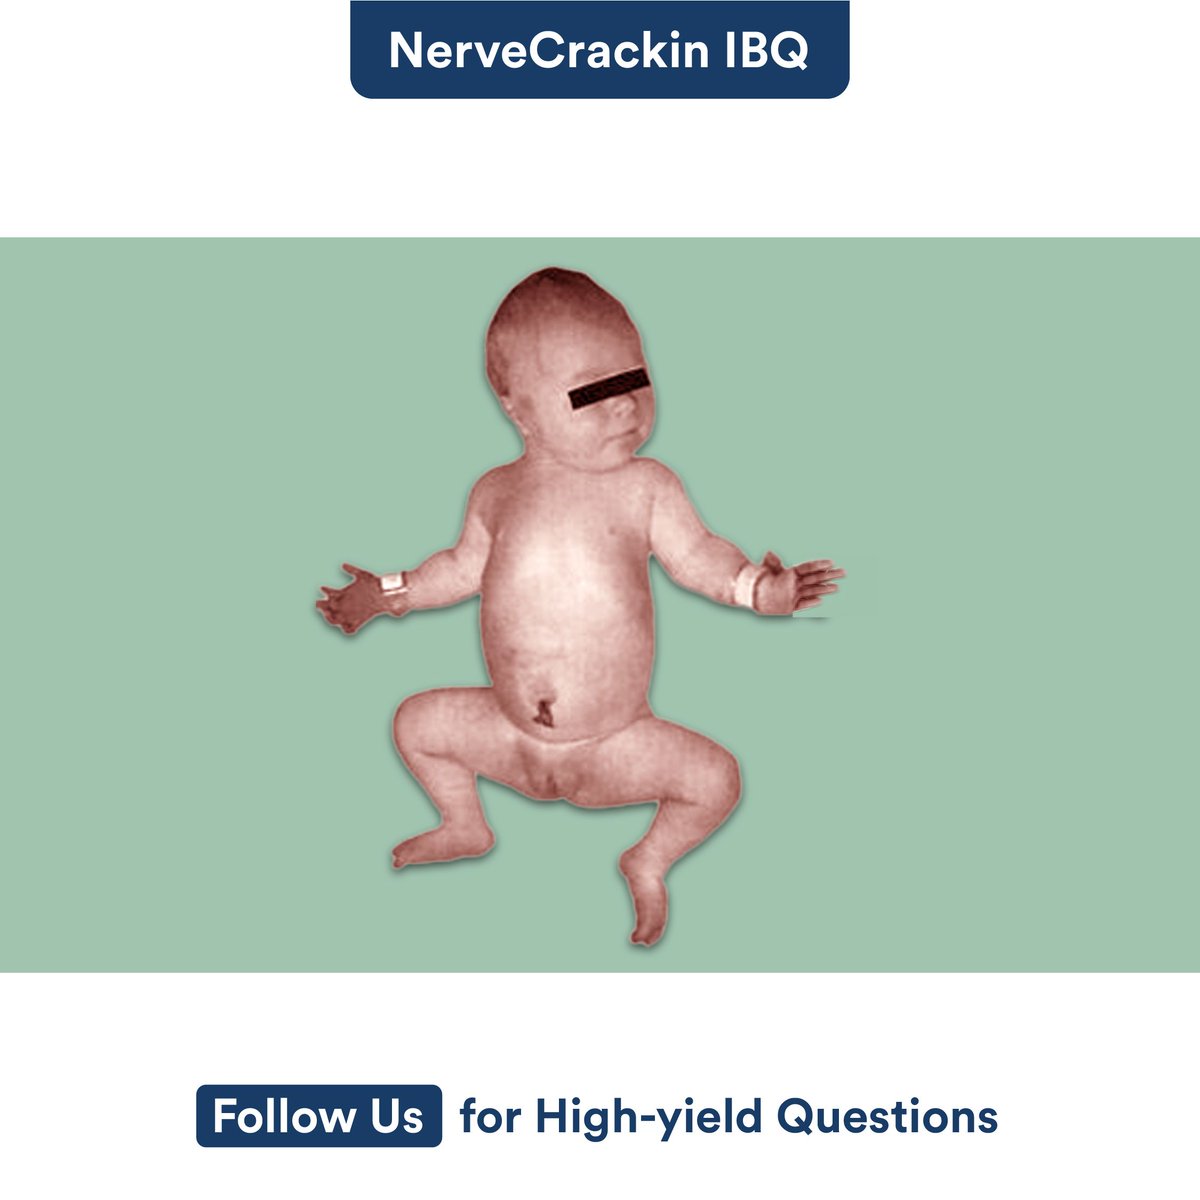 Identify the condition shown in the image? 

A) Cerebral Palsy 
B) Autism Spectrum Disorder 
C) Down Syndrome 
D) Fragile X Syndrome 

#DigiNerve #IBQ #NerveCrackin #QuizTime #MedicalStudents #MCQs #TestYourKnowledge #ImageBasedQuestion #cerebralpalsy ##Autism #Spectrum #Fragile